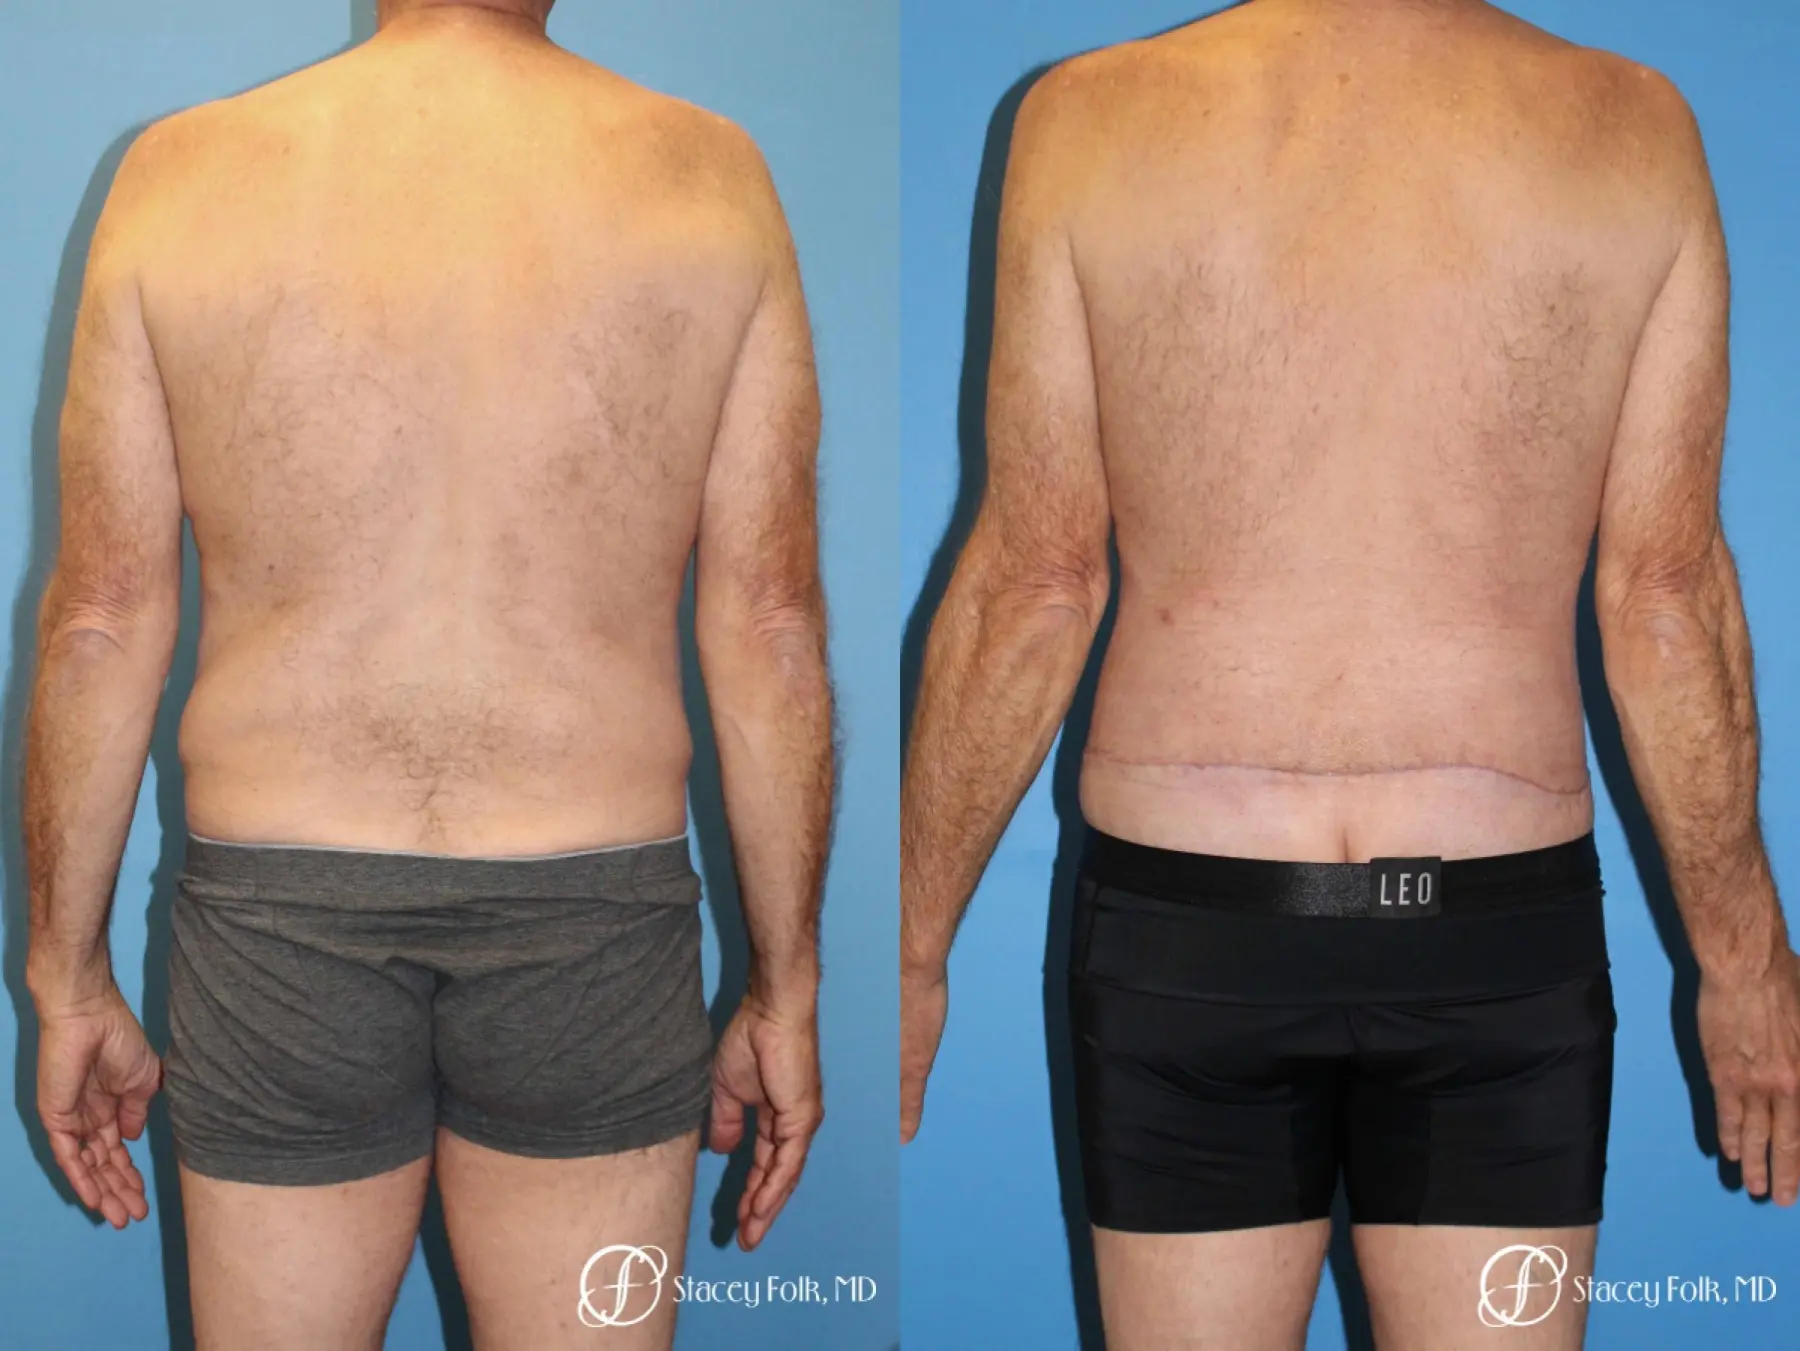 Body Lift Before & After Gallery: Patient 9